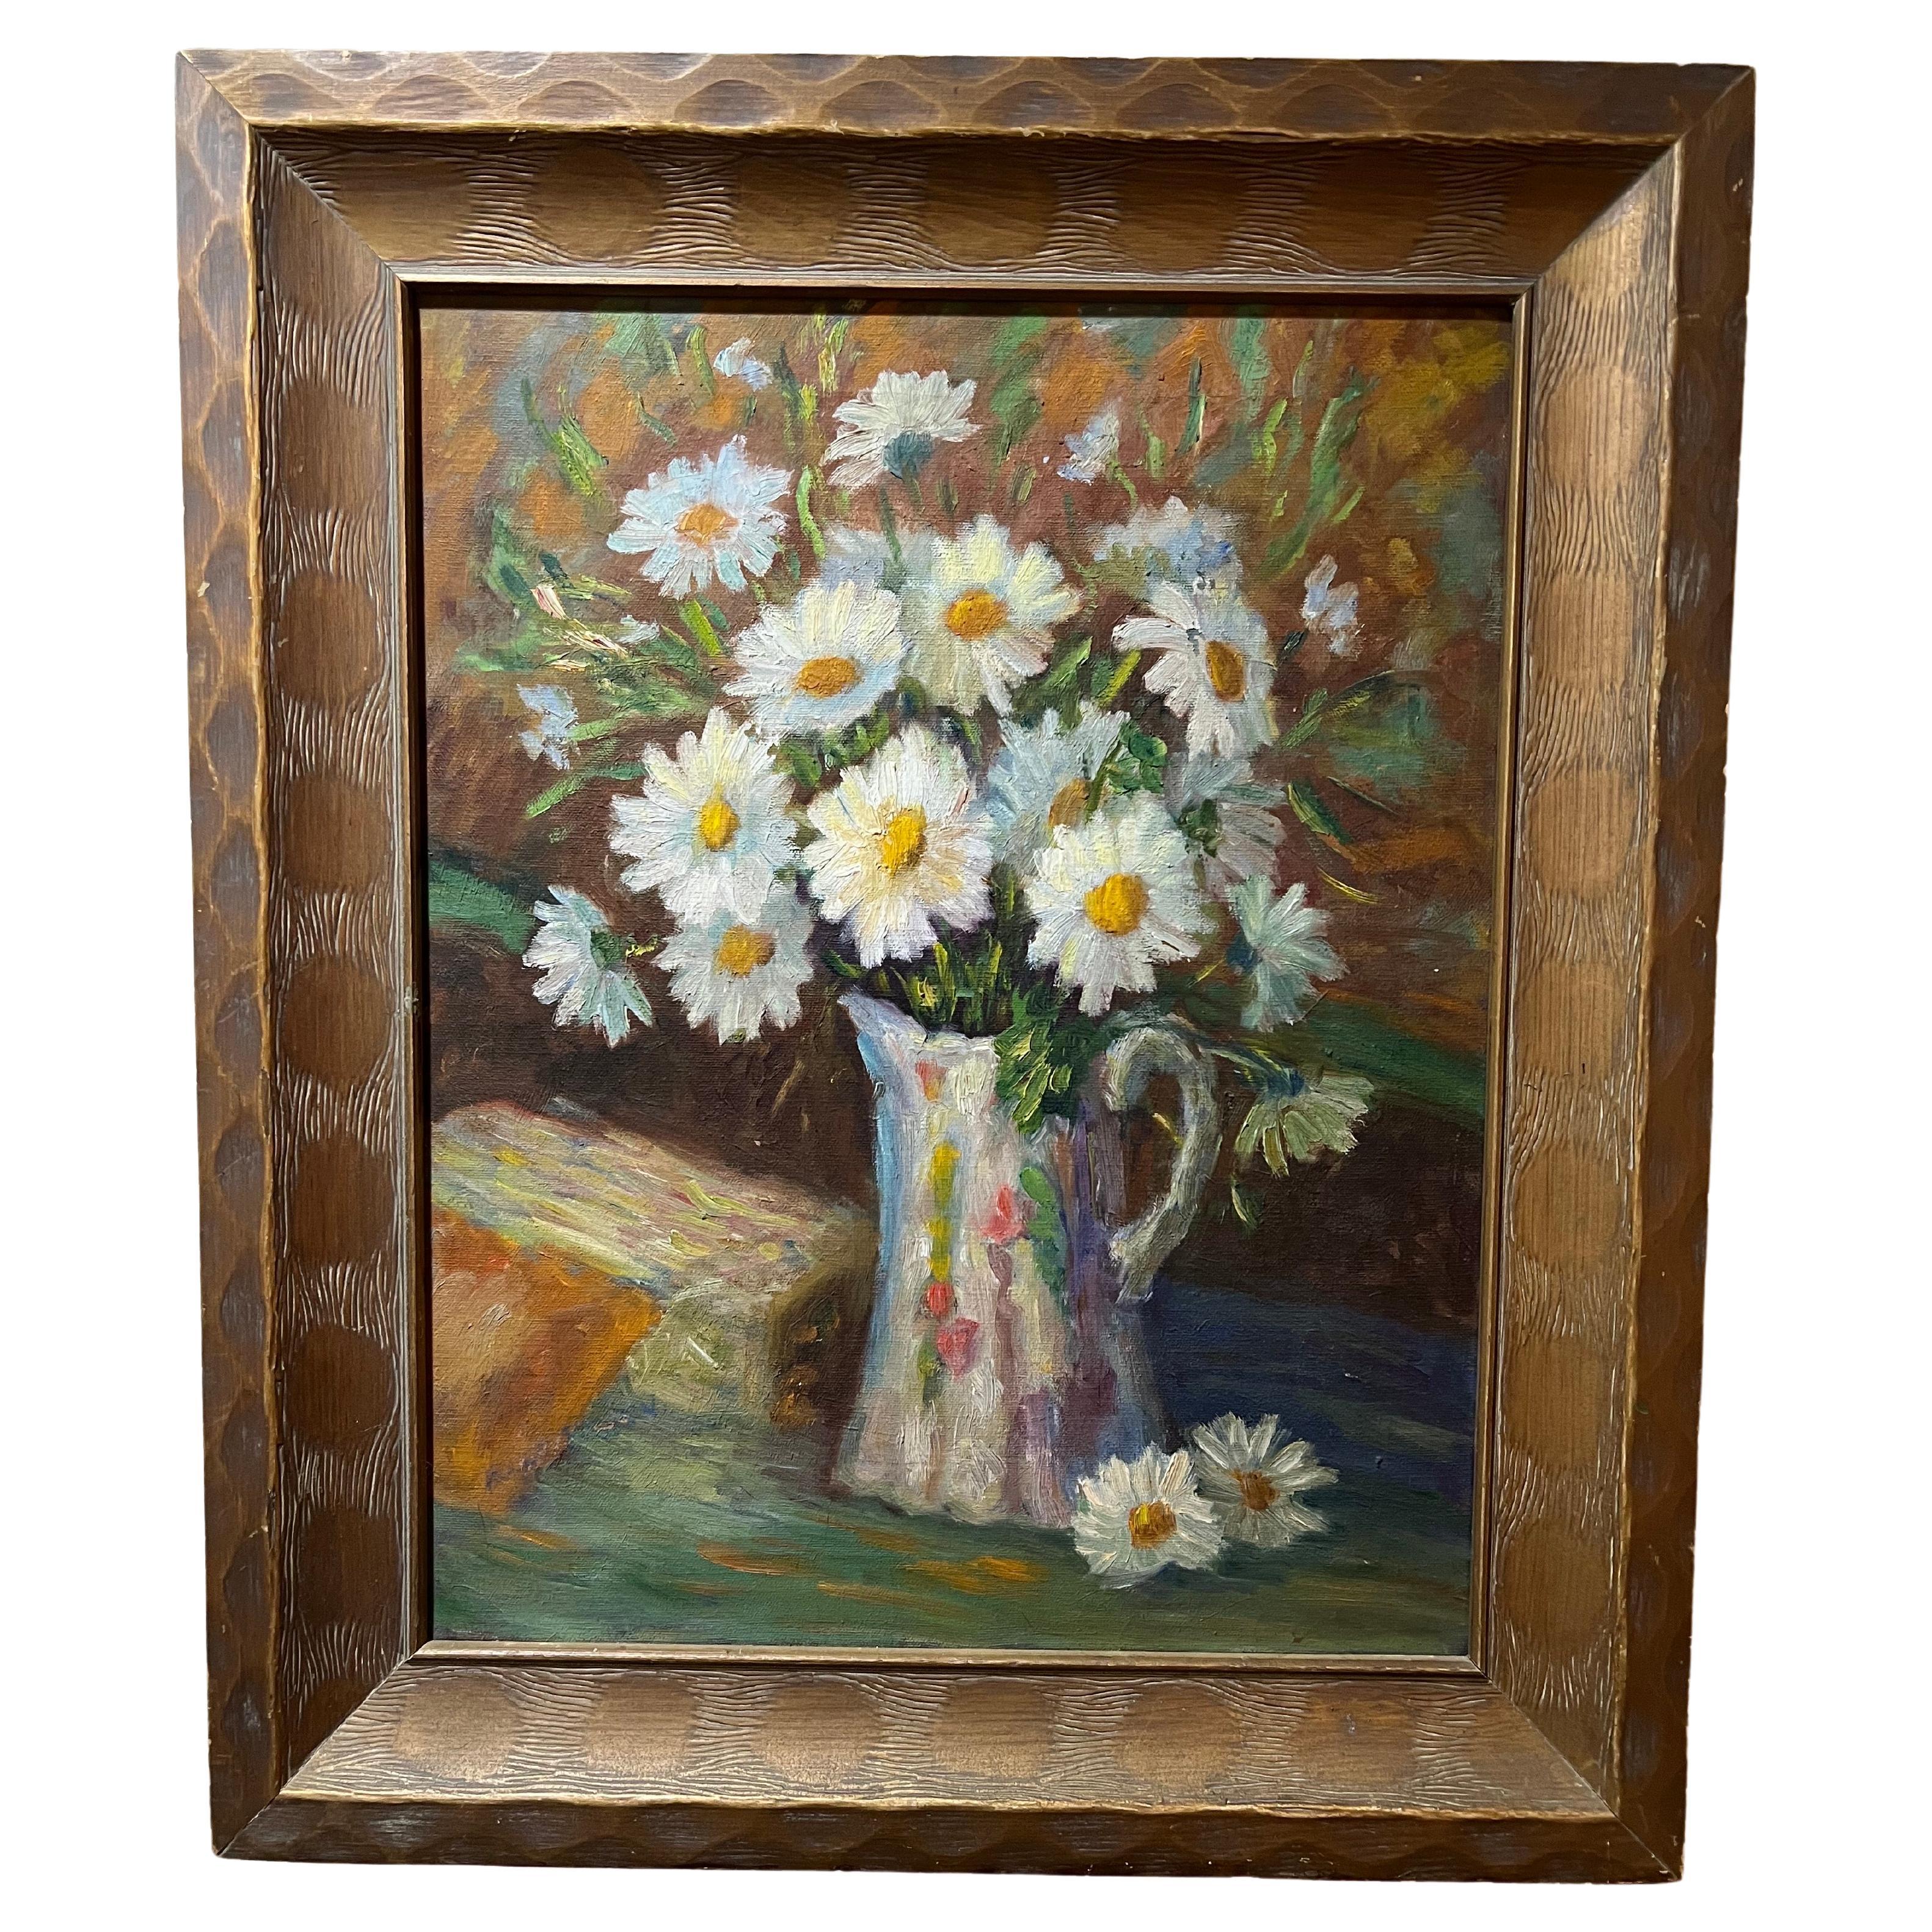 Impasto Impressionistic Painting of Daisies on the Style of Van Gogh For Sale